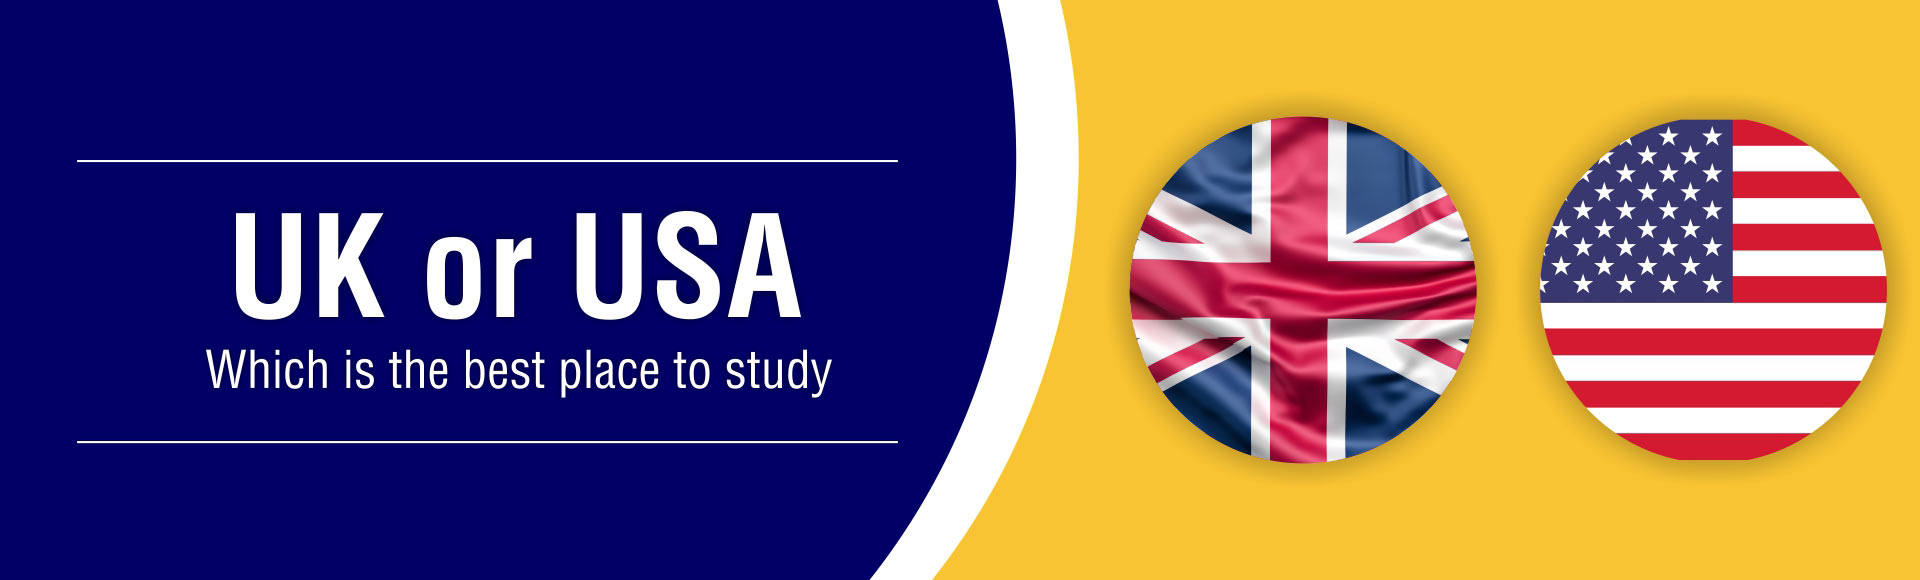 The UK or USA - Which is the best place to study?